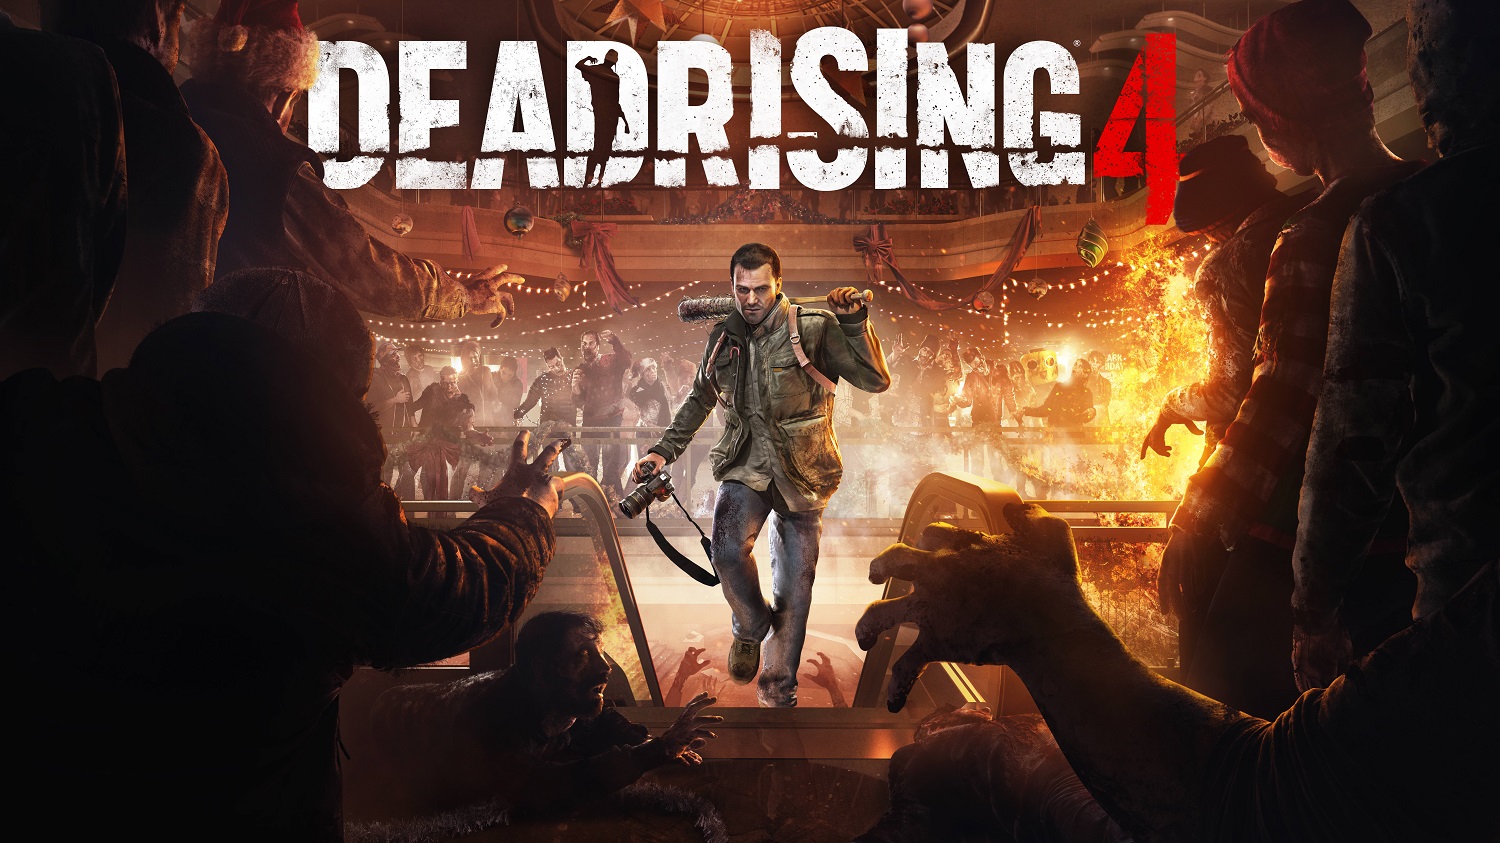 Dead Rising 5 leaks reveal cancelled game with Dead Rising 2 character